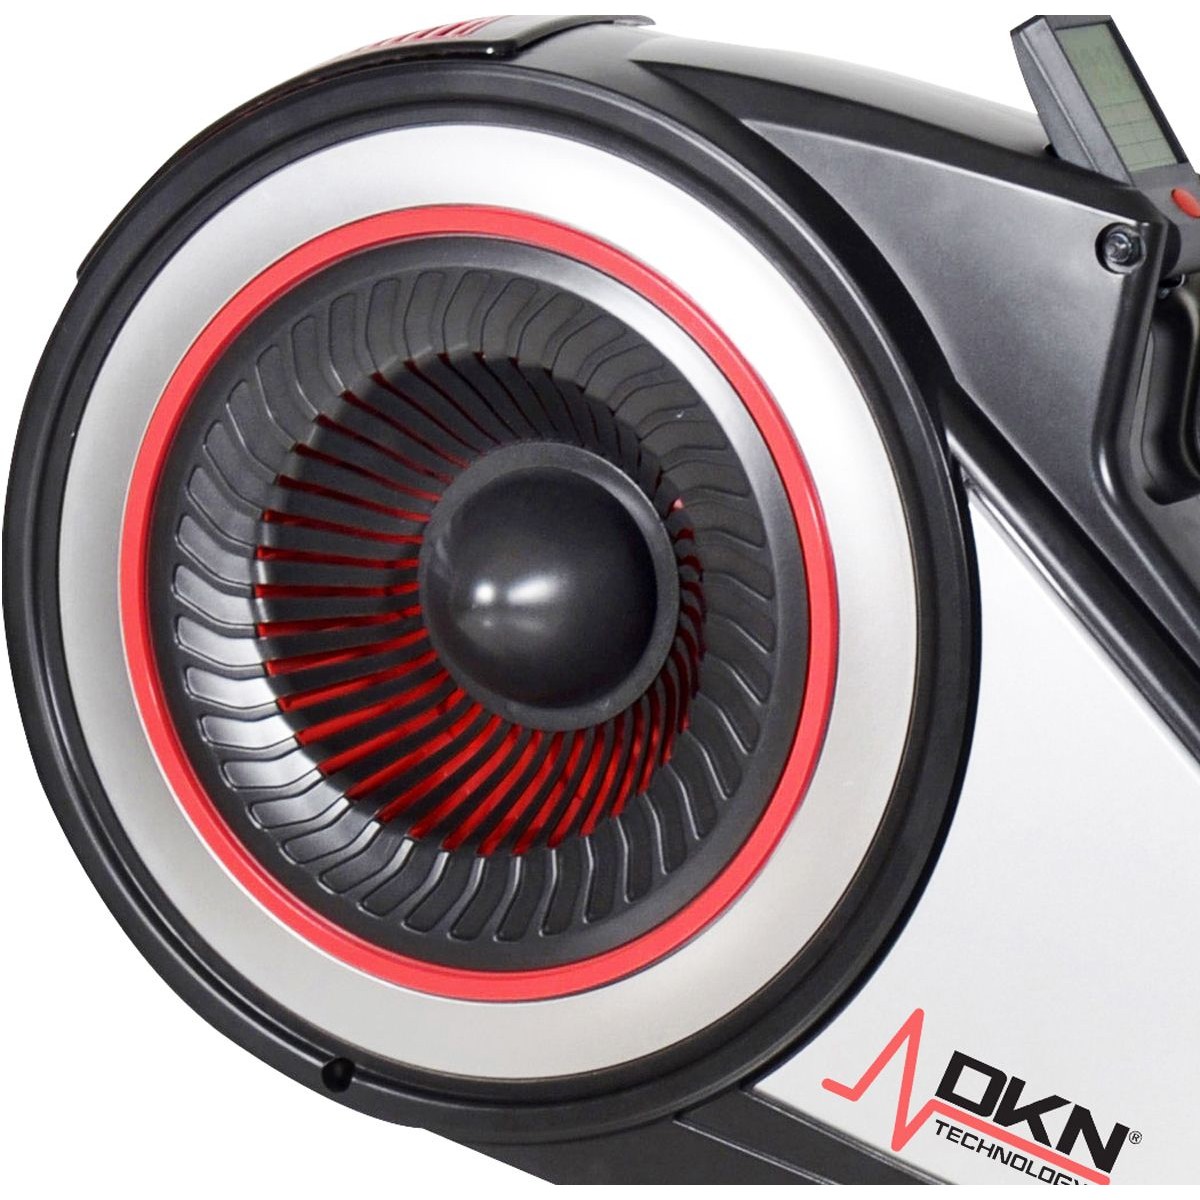 DKN Roeitrainer R-320